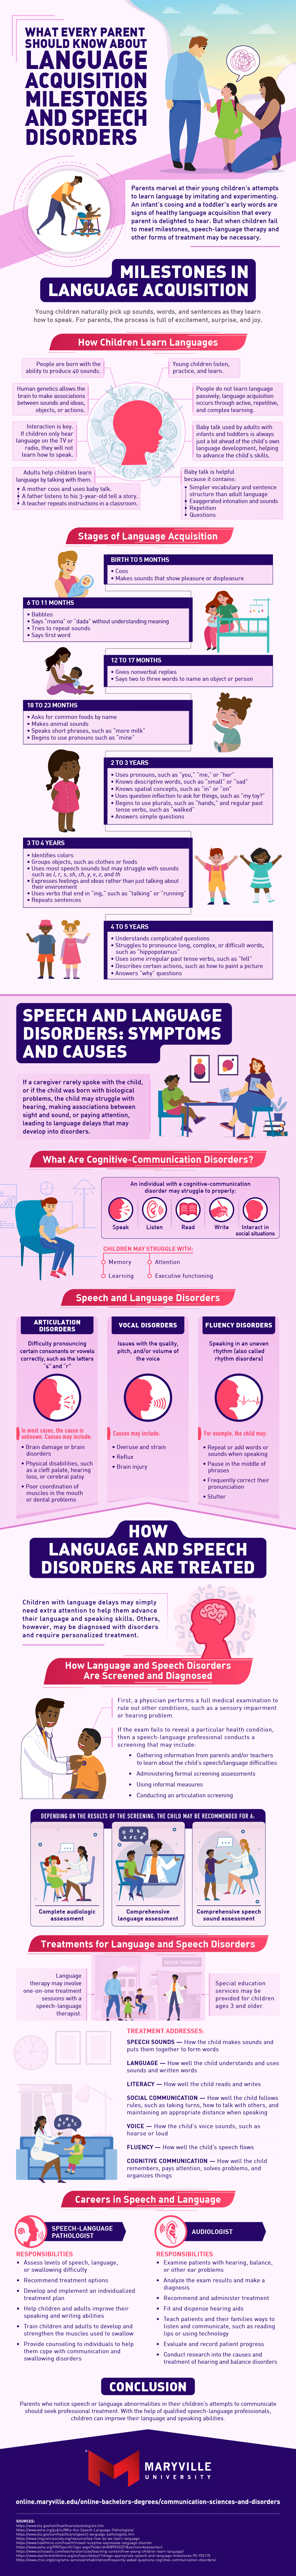 How speech and language disorders can be recognized and treated.